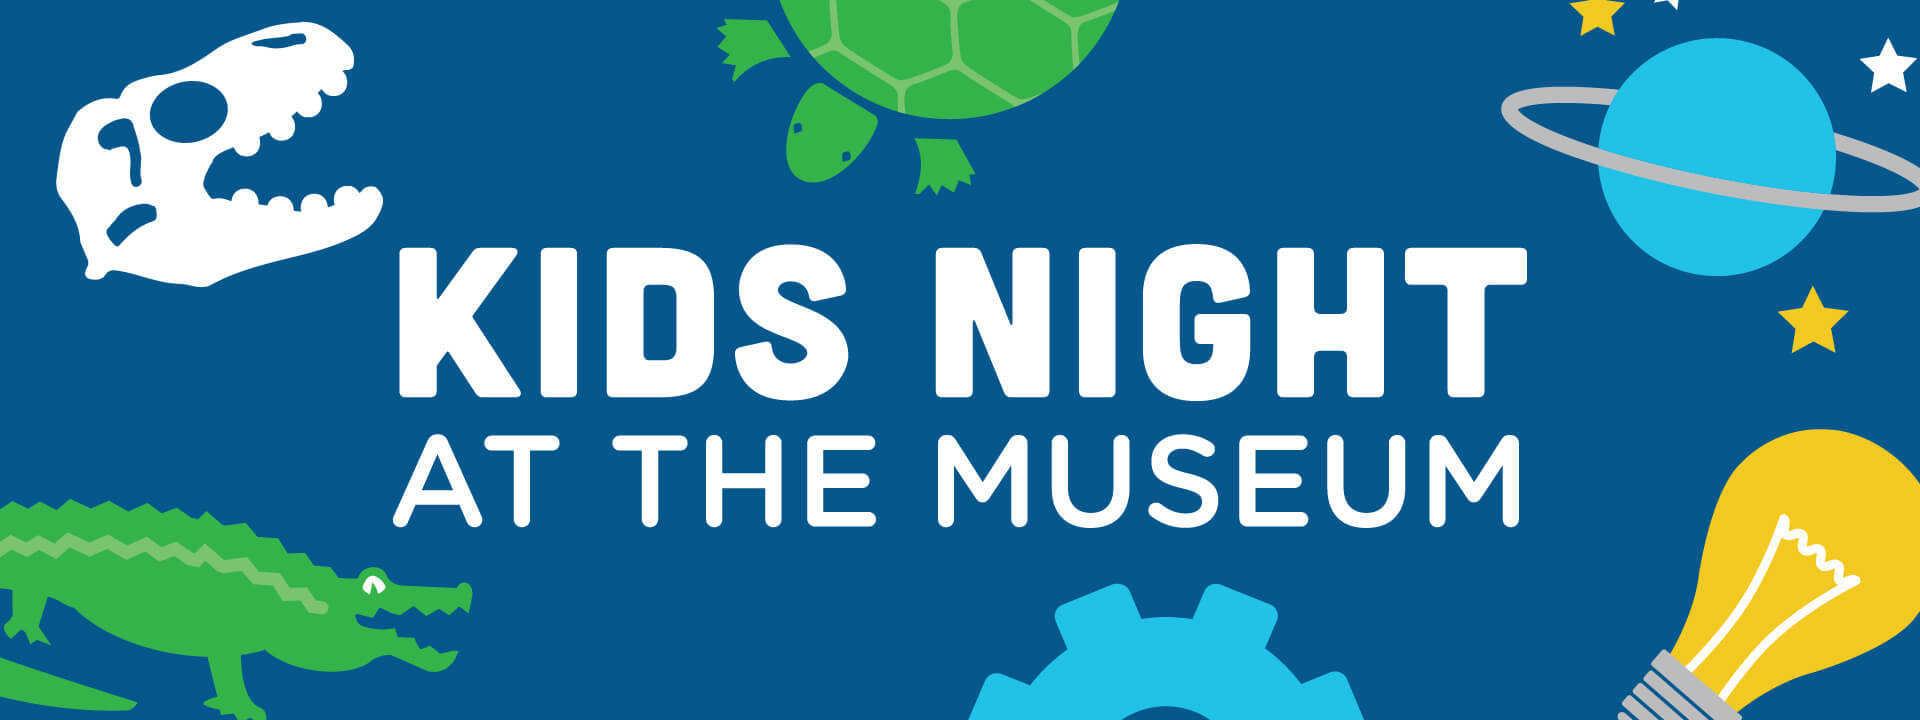 Kids Night at the Museum logo with icons of science topics